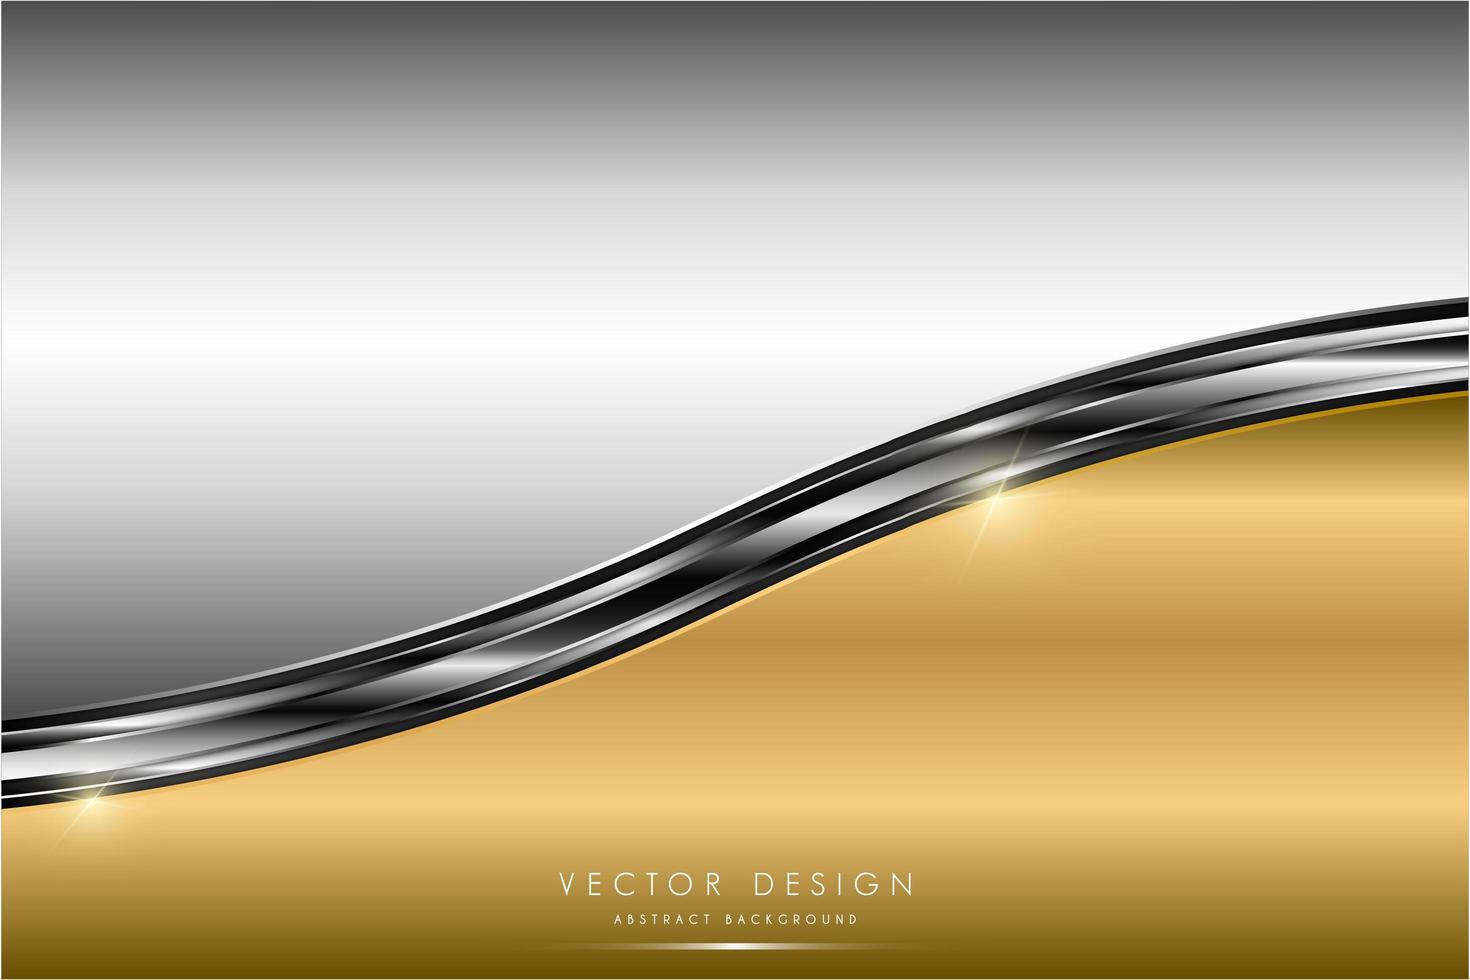 Metallic gold and silver glossy curved panels vector